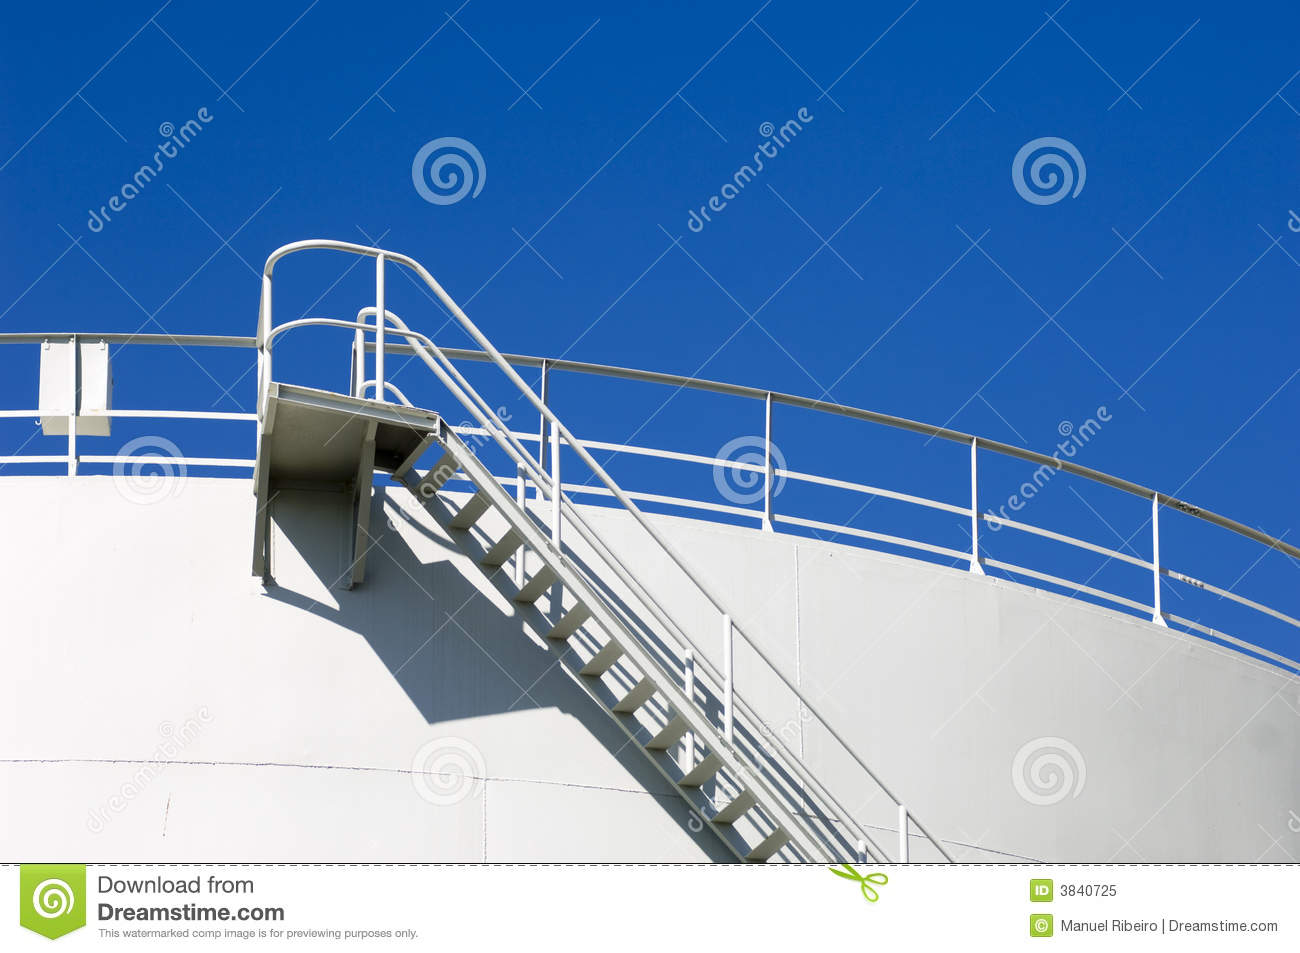 Oil Reservoir Detail With Acess Ladder Against A Blue Sky 